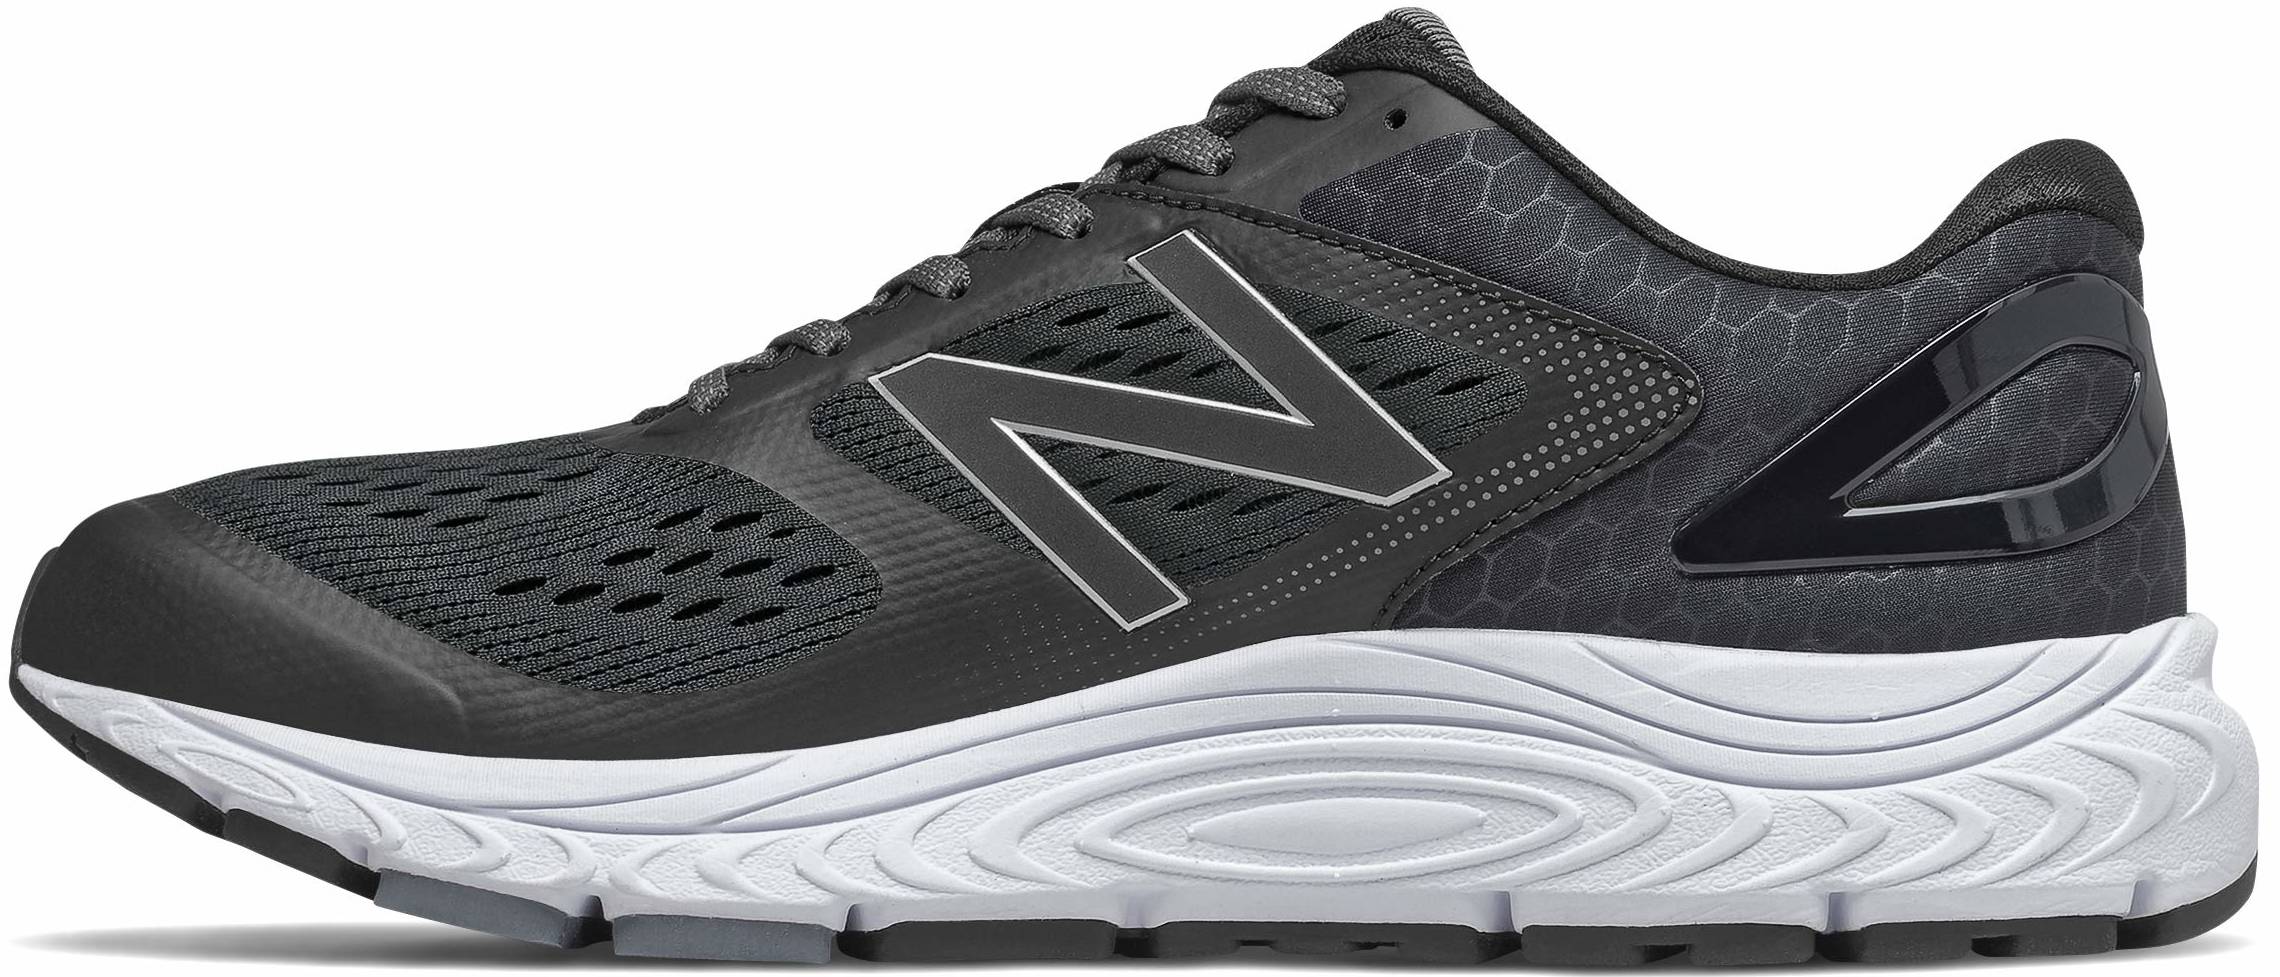 new balance 840 review